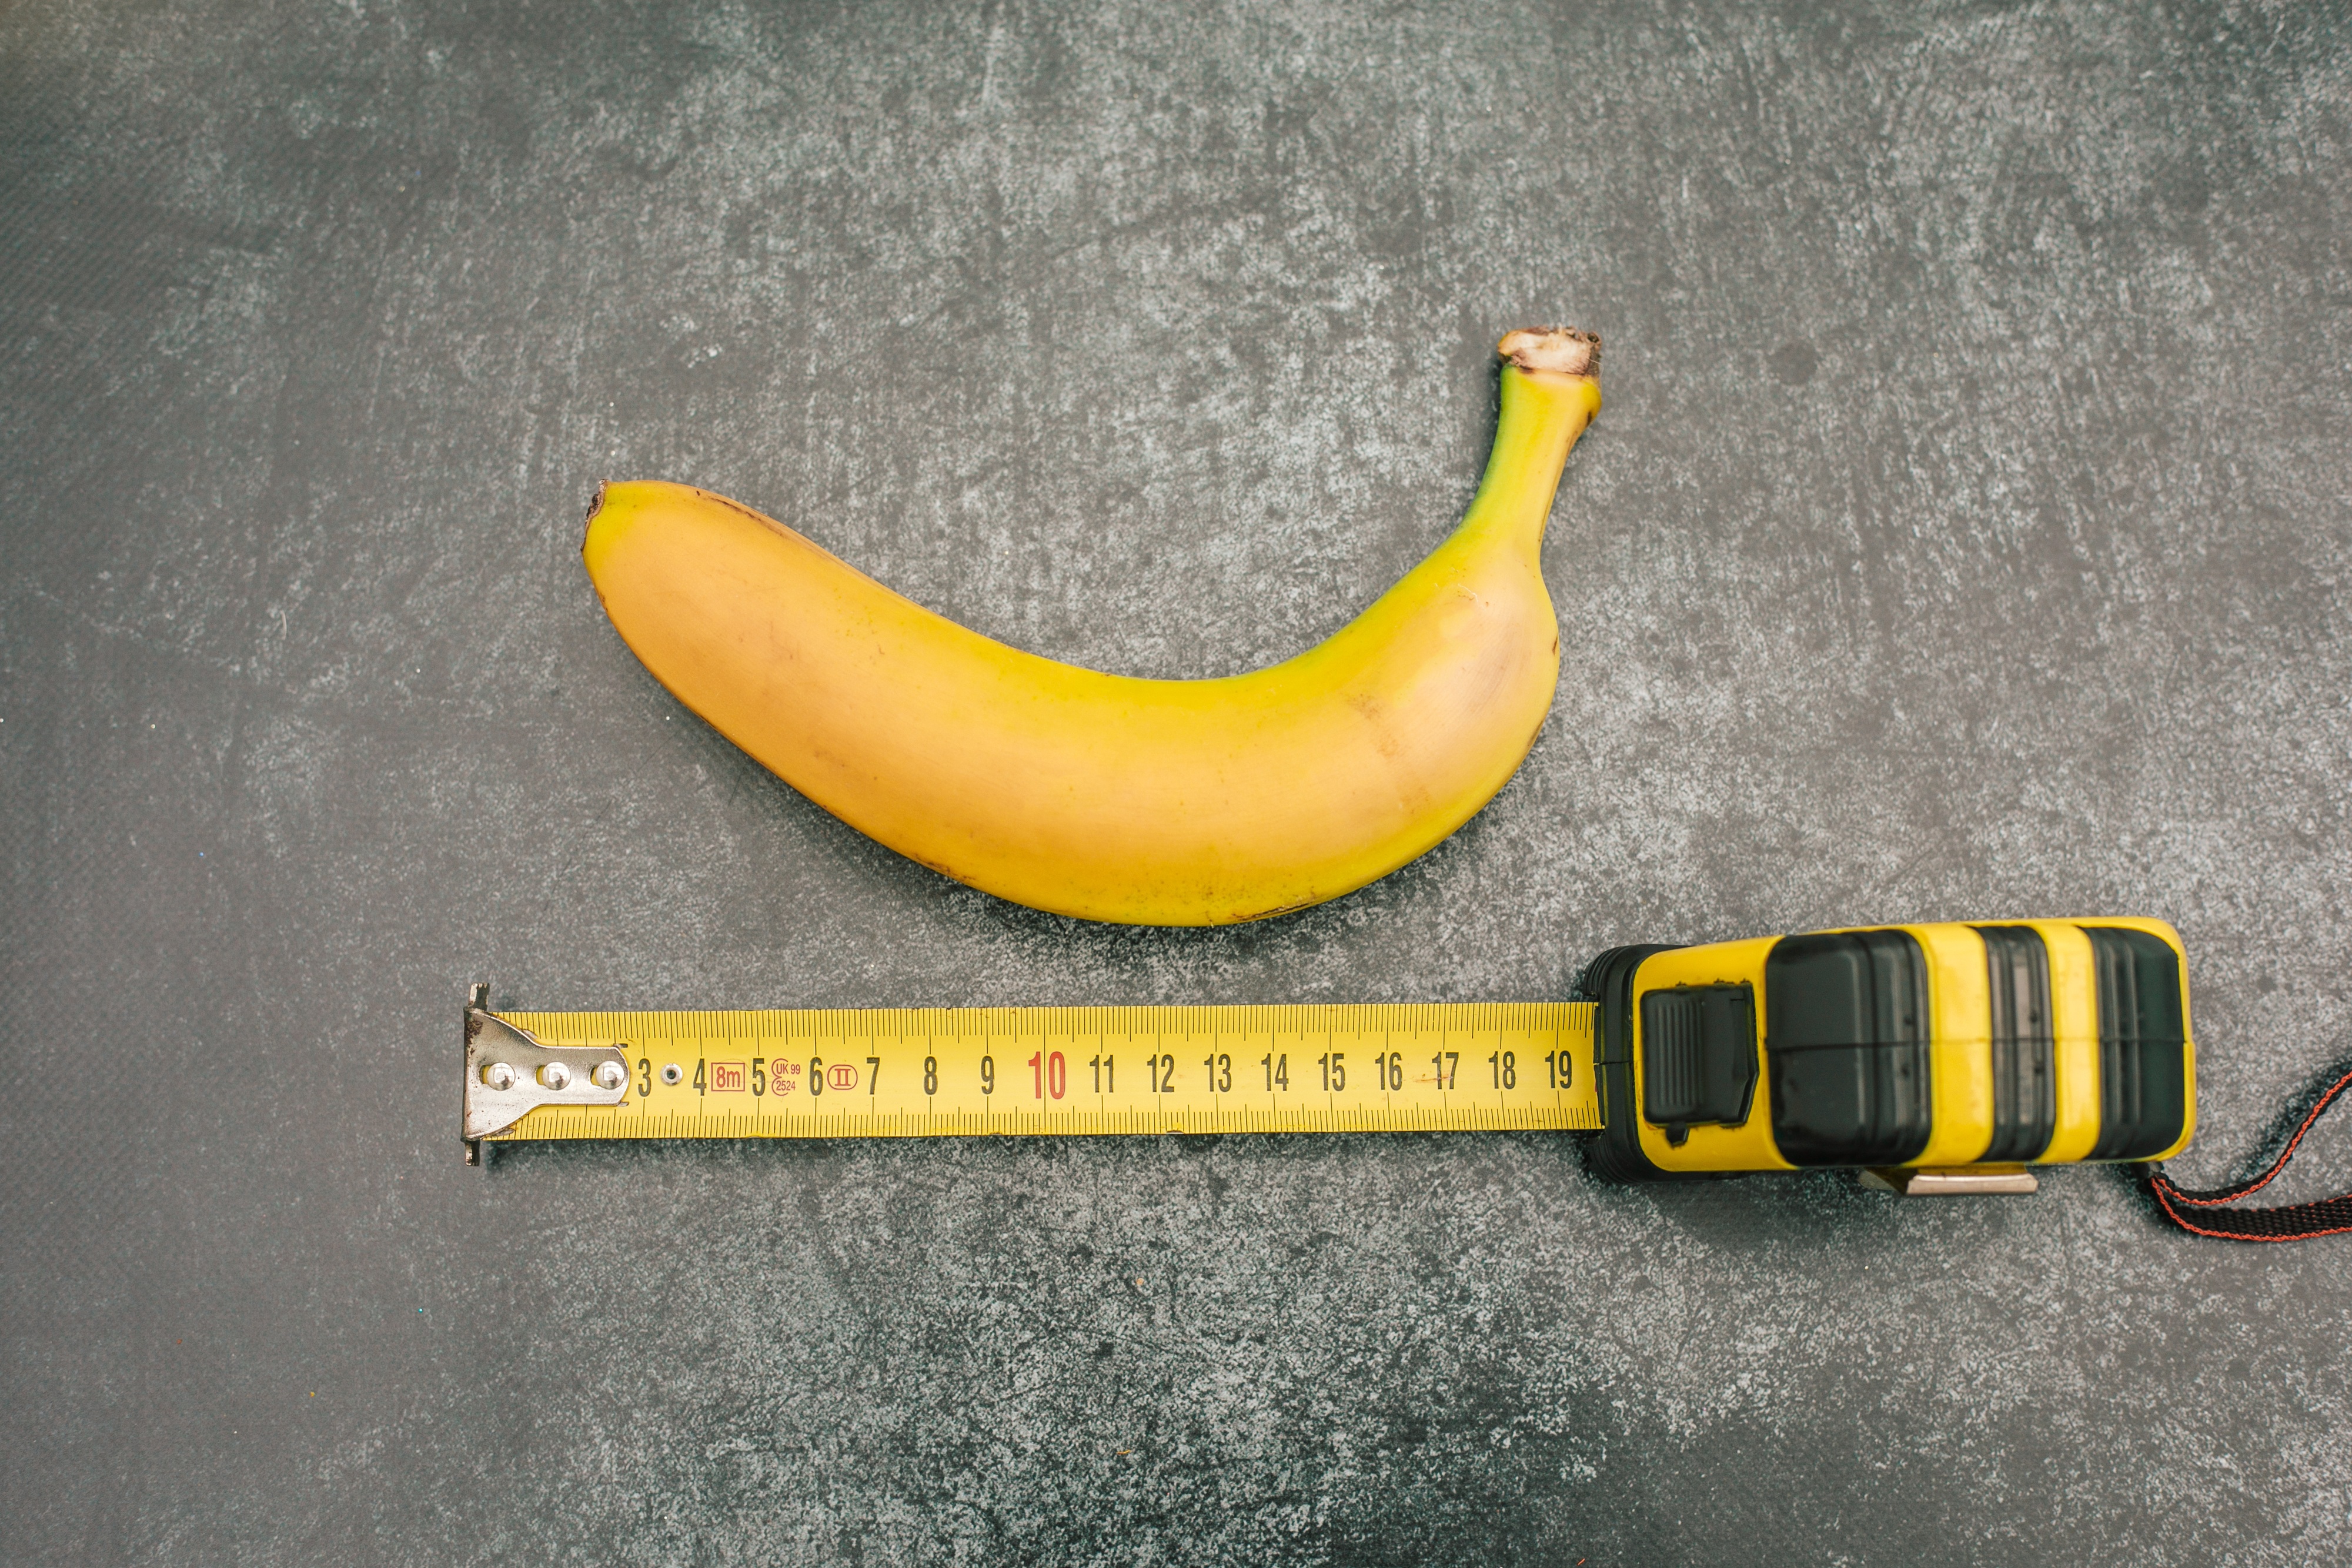 Banana next to a measuring tape showing length on a gray surface